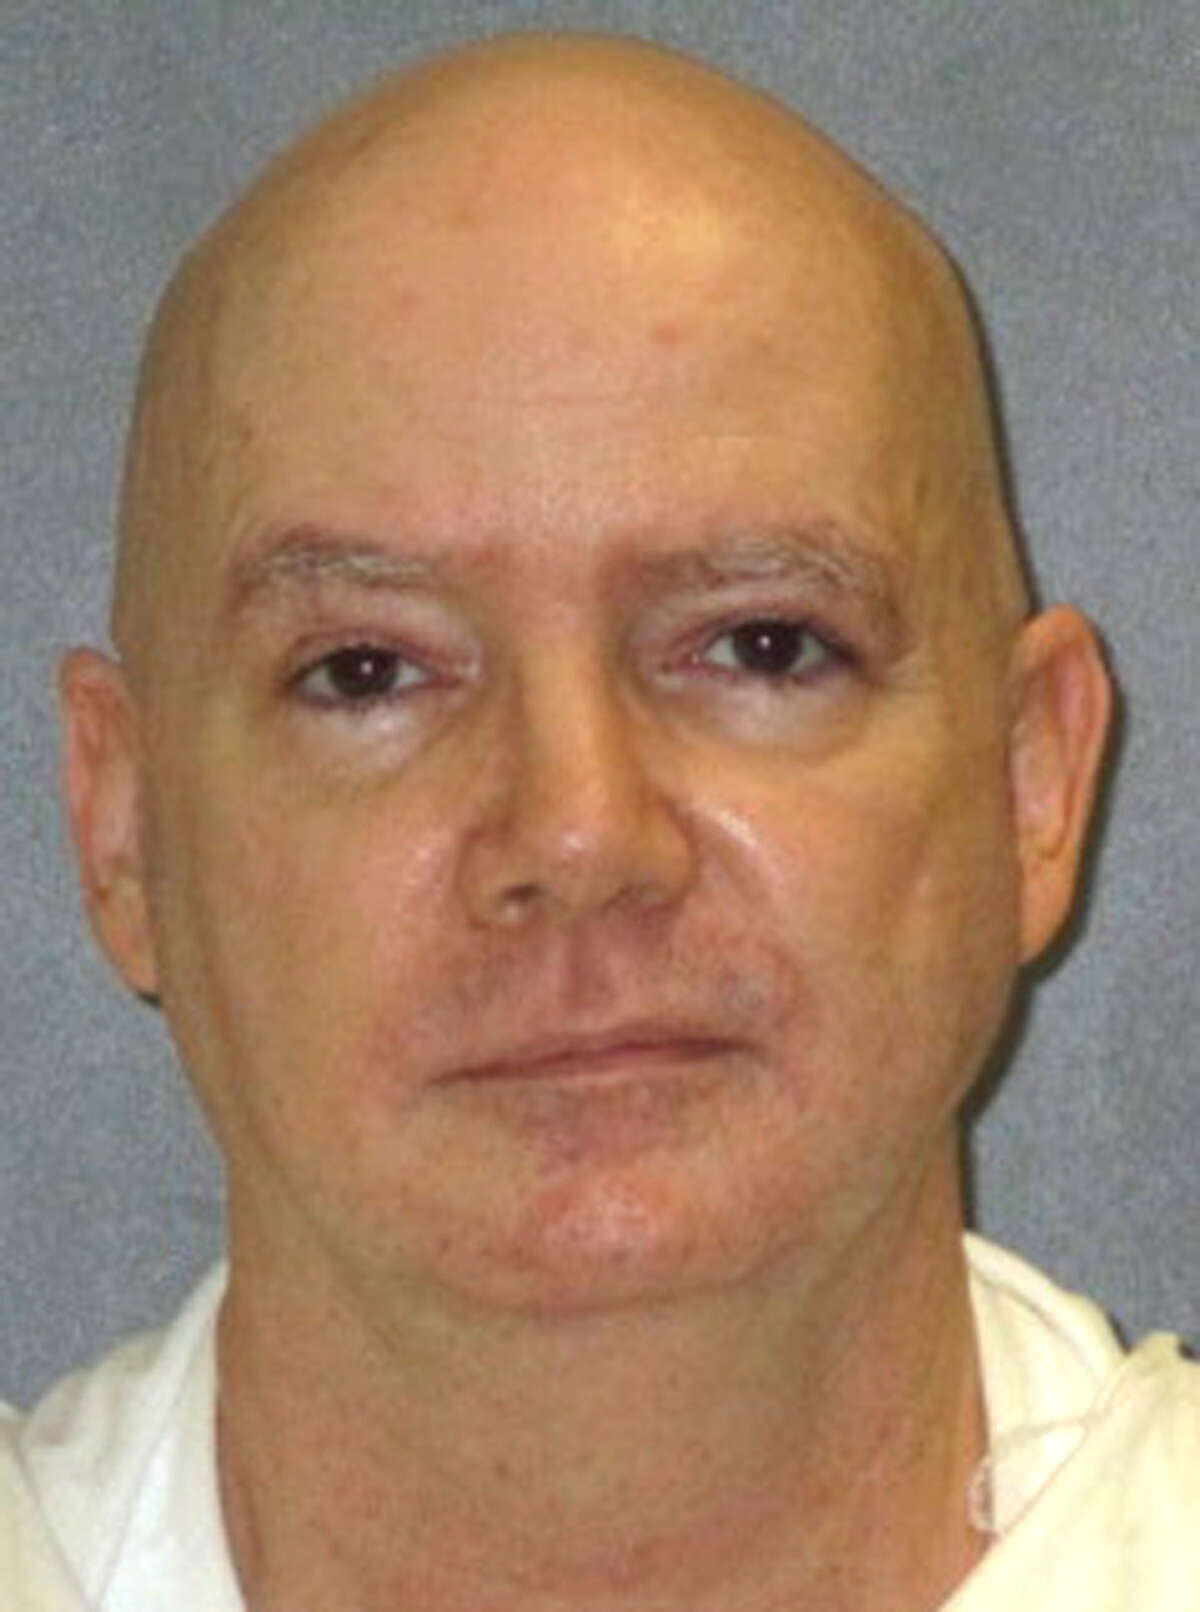 FILE - This file photo provided by the Texas Department of Criminal Justice shows Anthony Allen Shore. Shore, a Houston-area sex offender who was convicted of killing a young woman and confessed to three more strangling deaths, is set for lethal injection in Texas on Thursday, Jan. 18, 2018, in what would be the first U.S. execution of 2018. (Texas Department of Criminal Justice via AP, File)